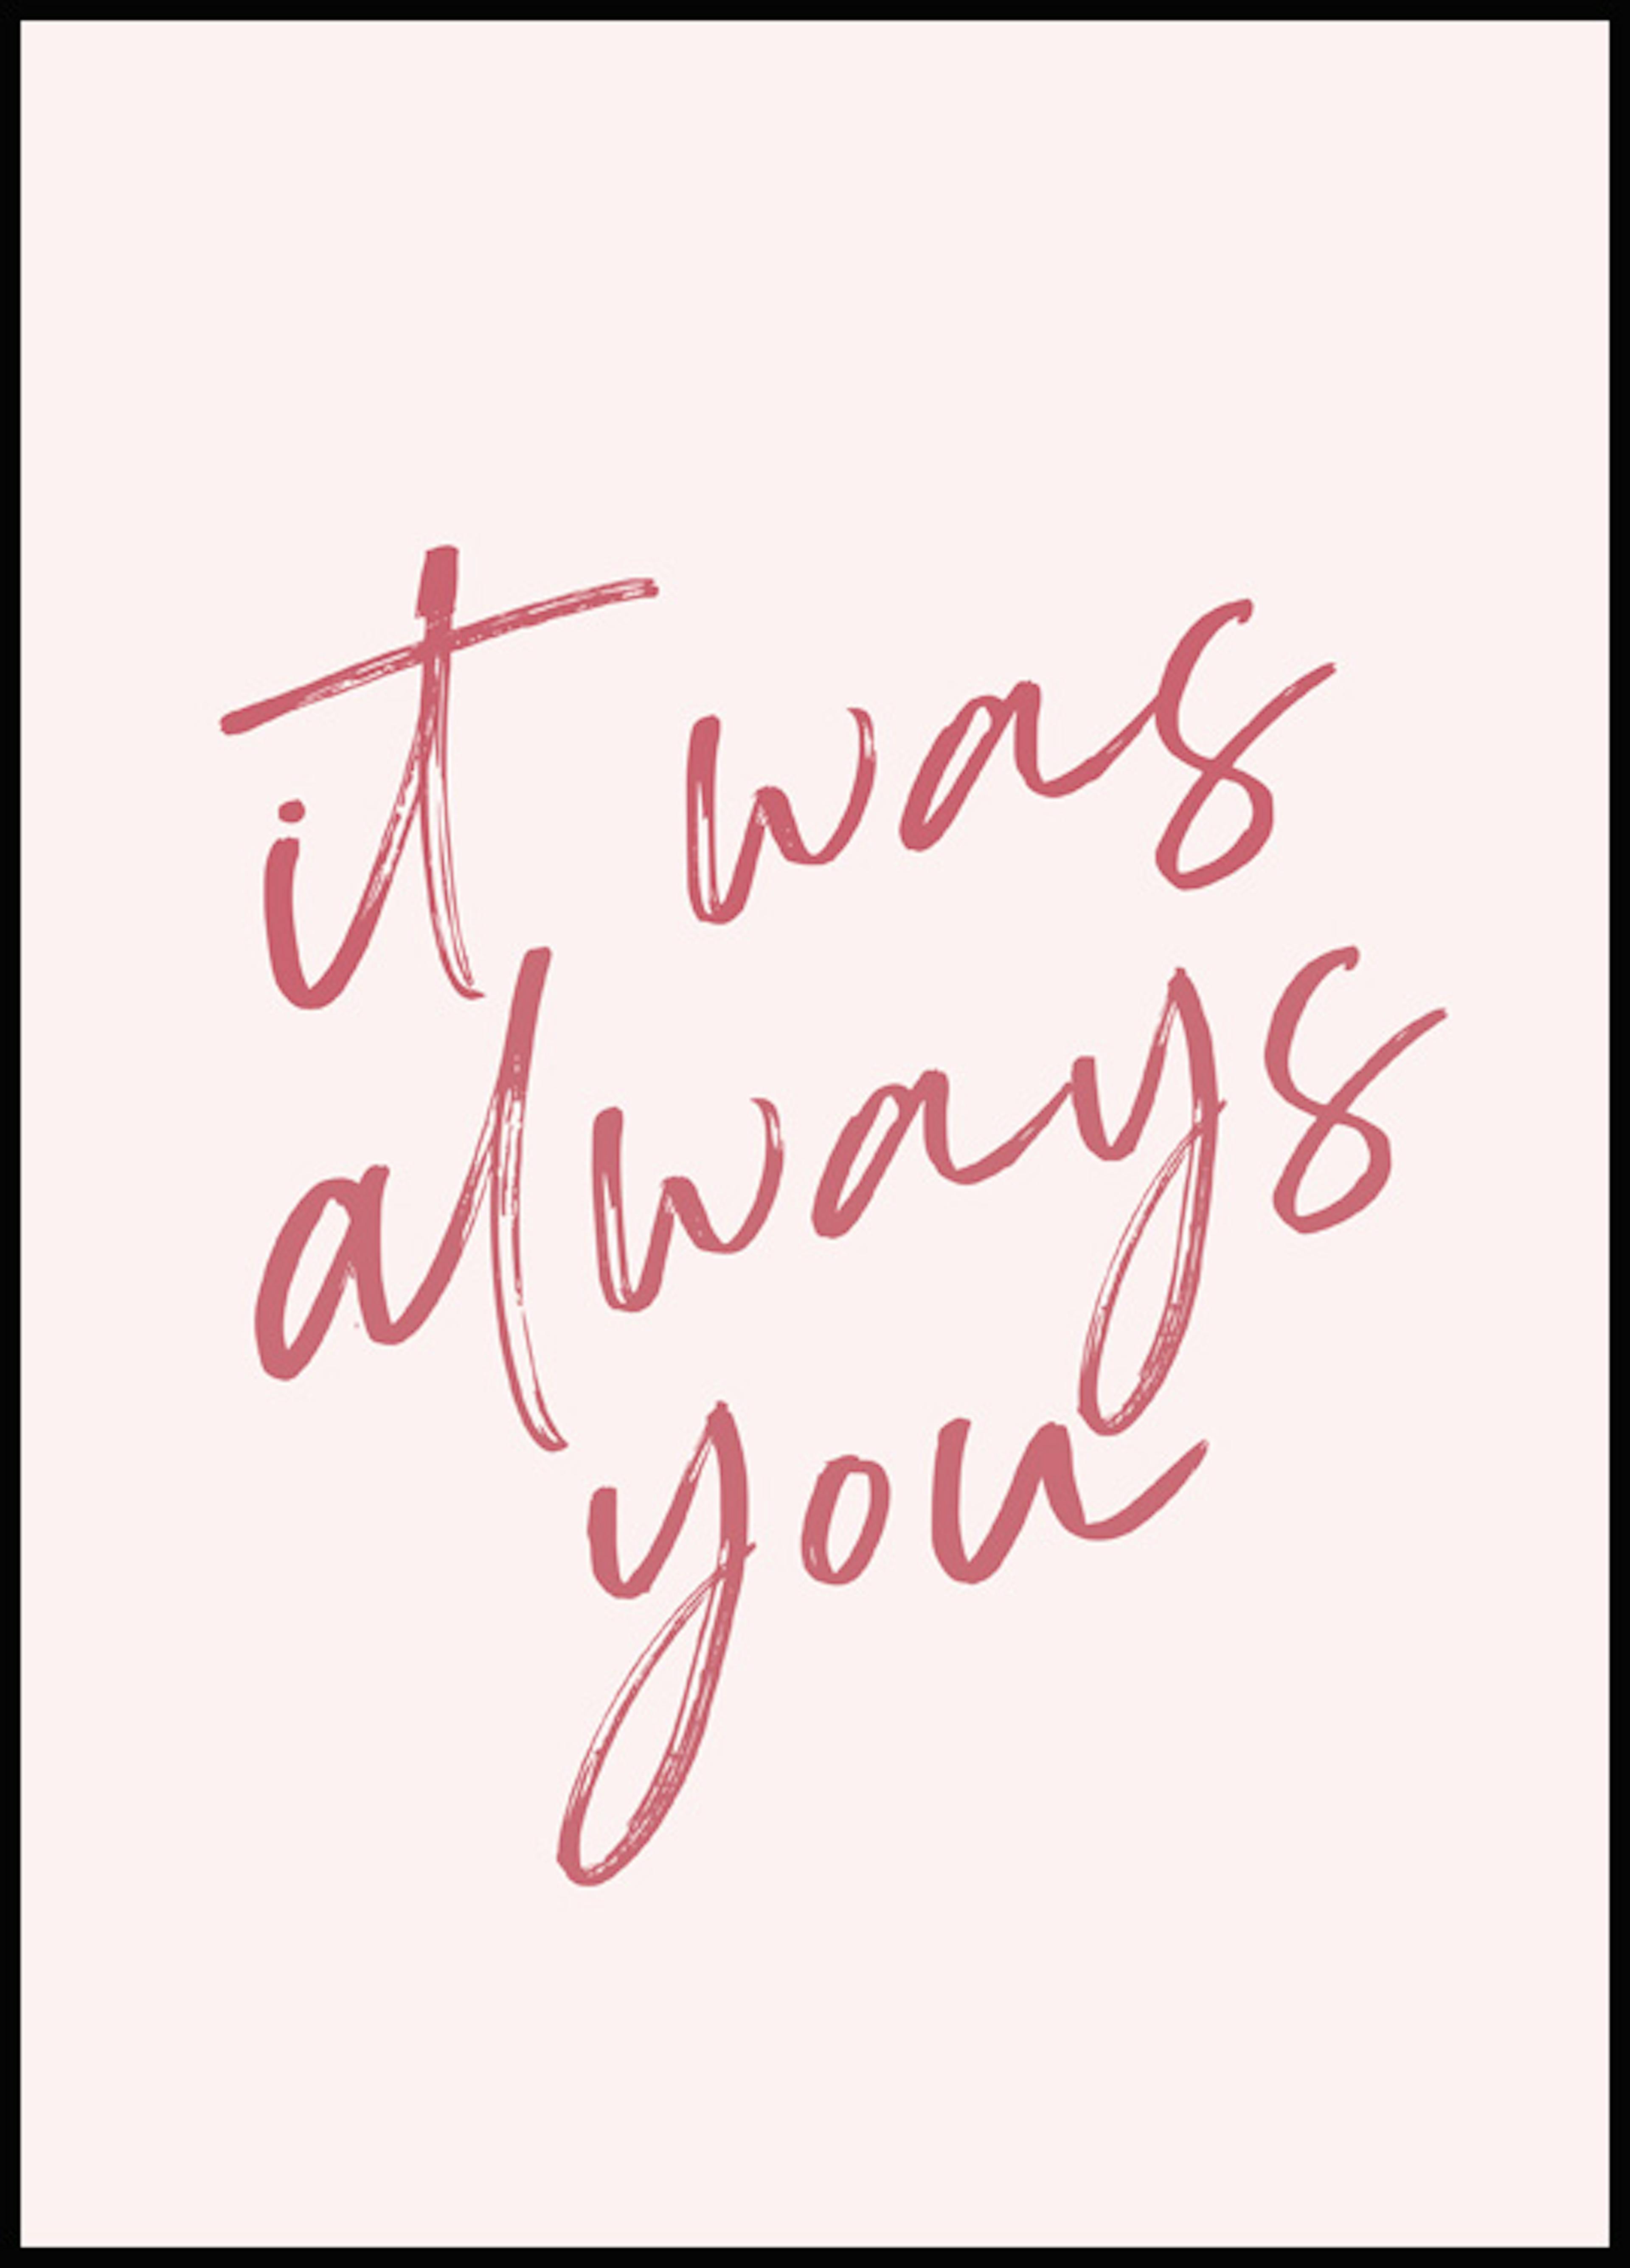 Always You Poster 0